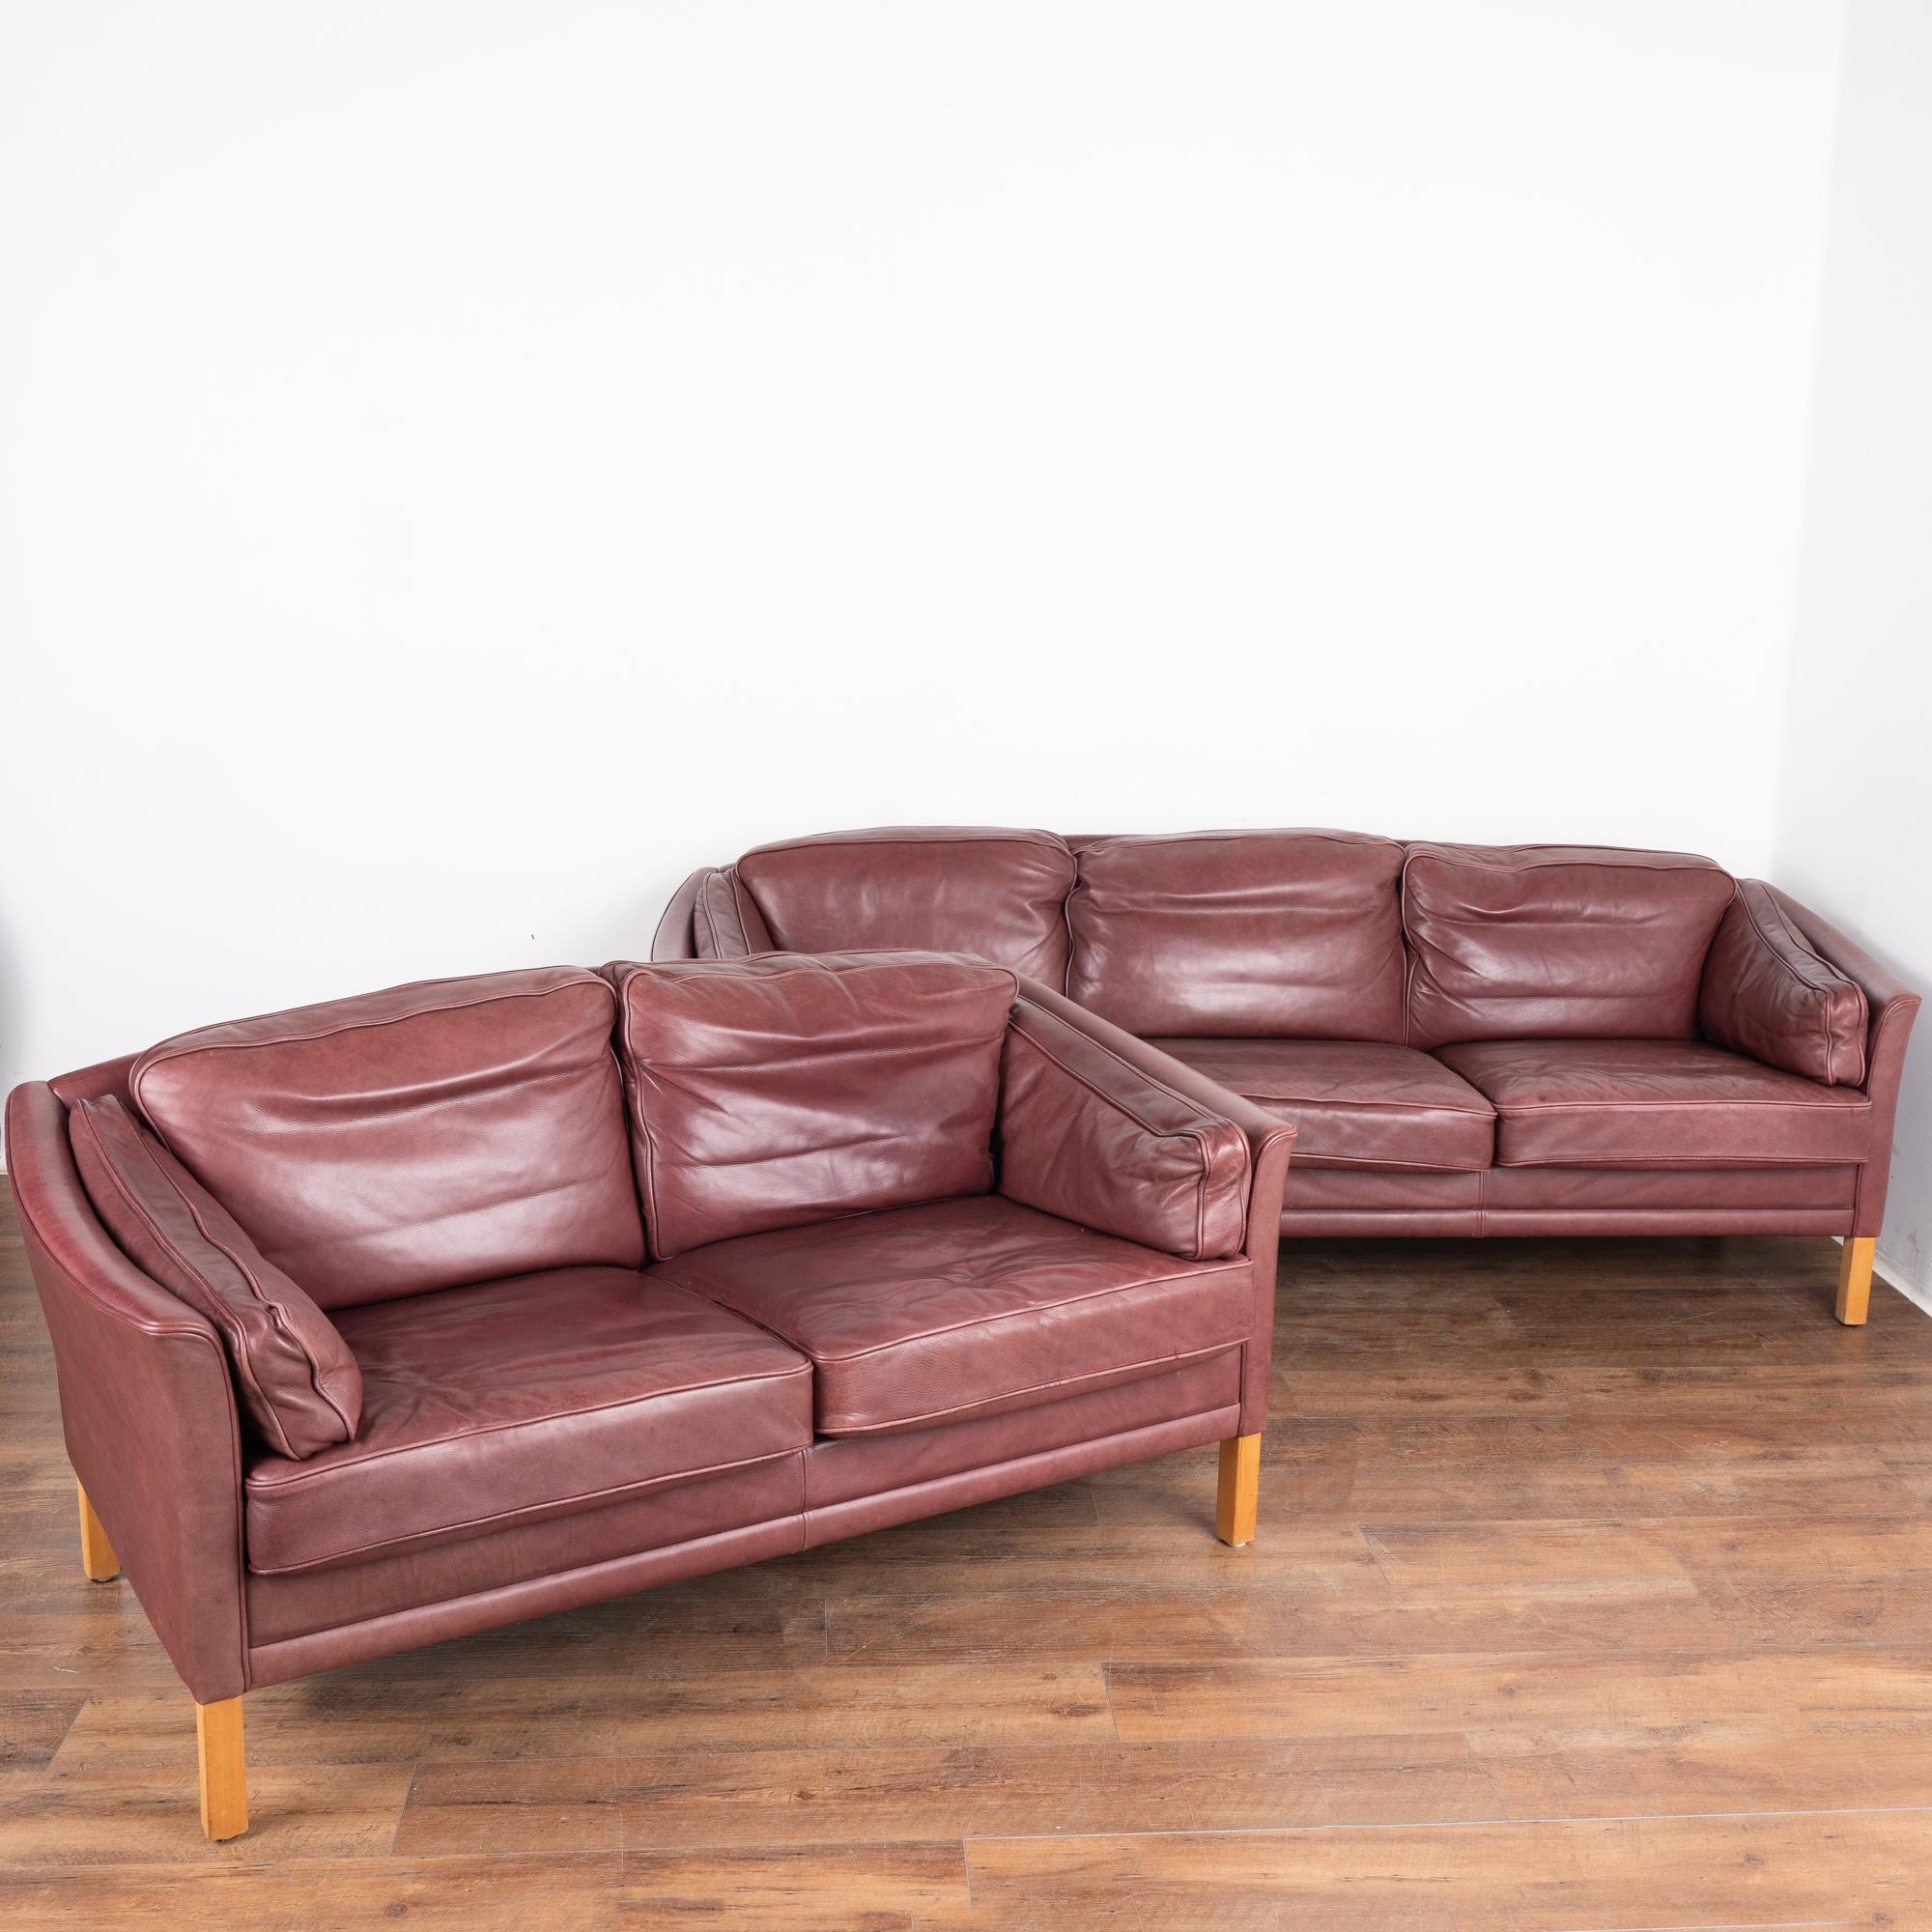 Mid-century modern three-seat sofa and two-seat loveseat set with hard wood birch legs.
Upholstered in vintage plum/light purple leather with loose cushions on the sides, seat and back. Each has a zippered cover so cushion inserts are removeable.